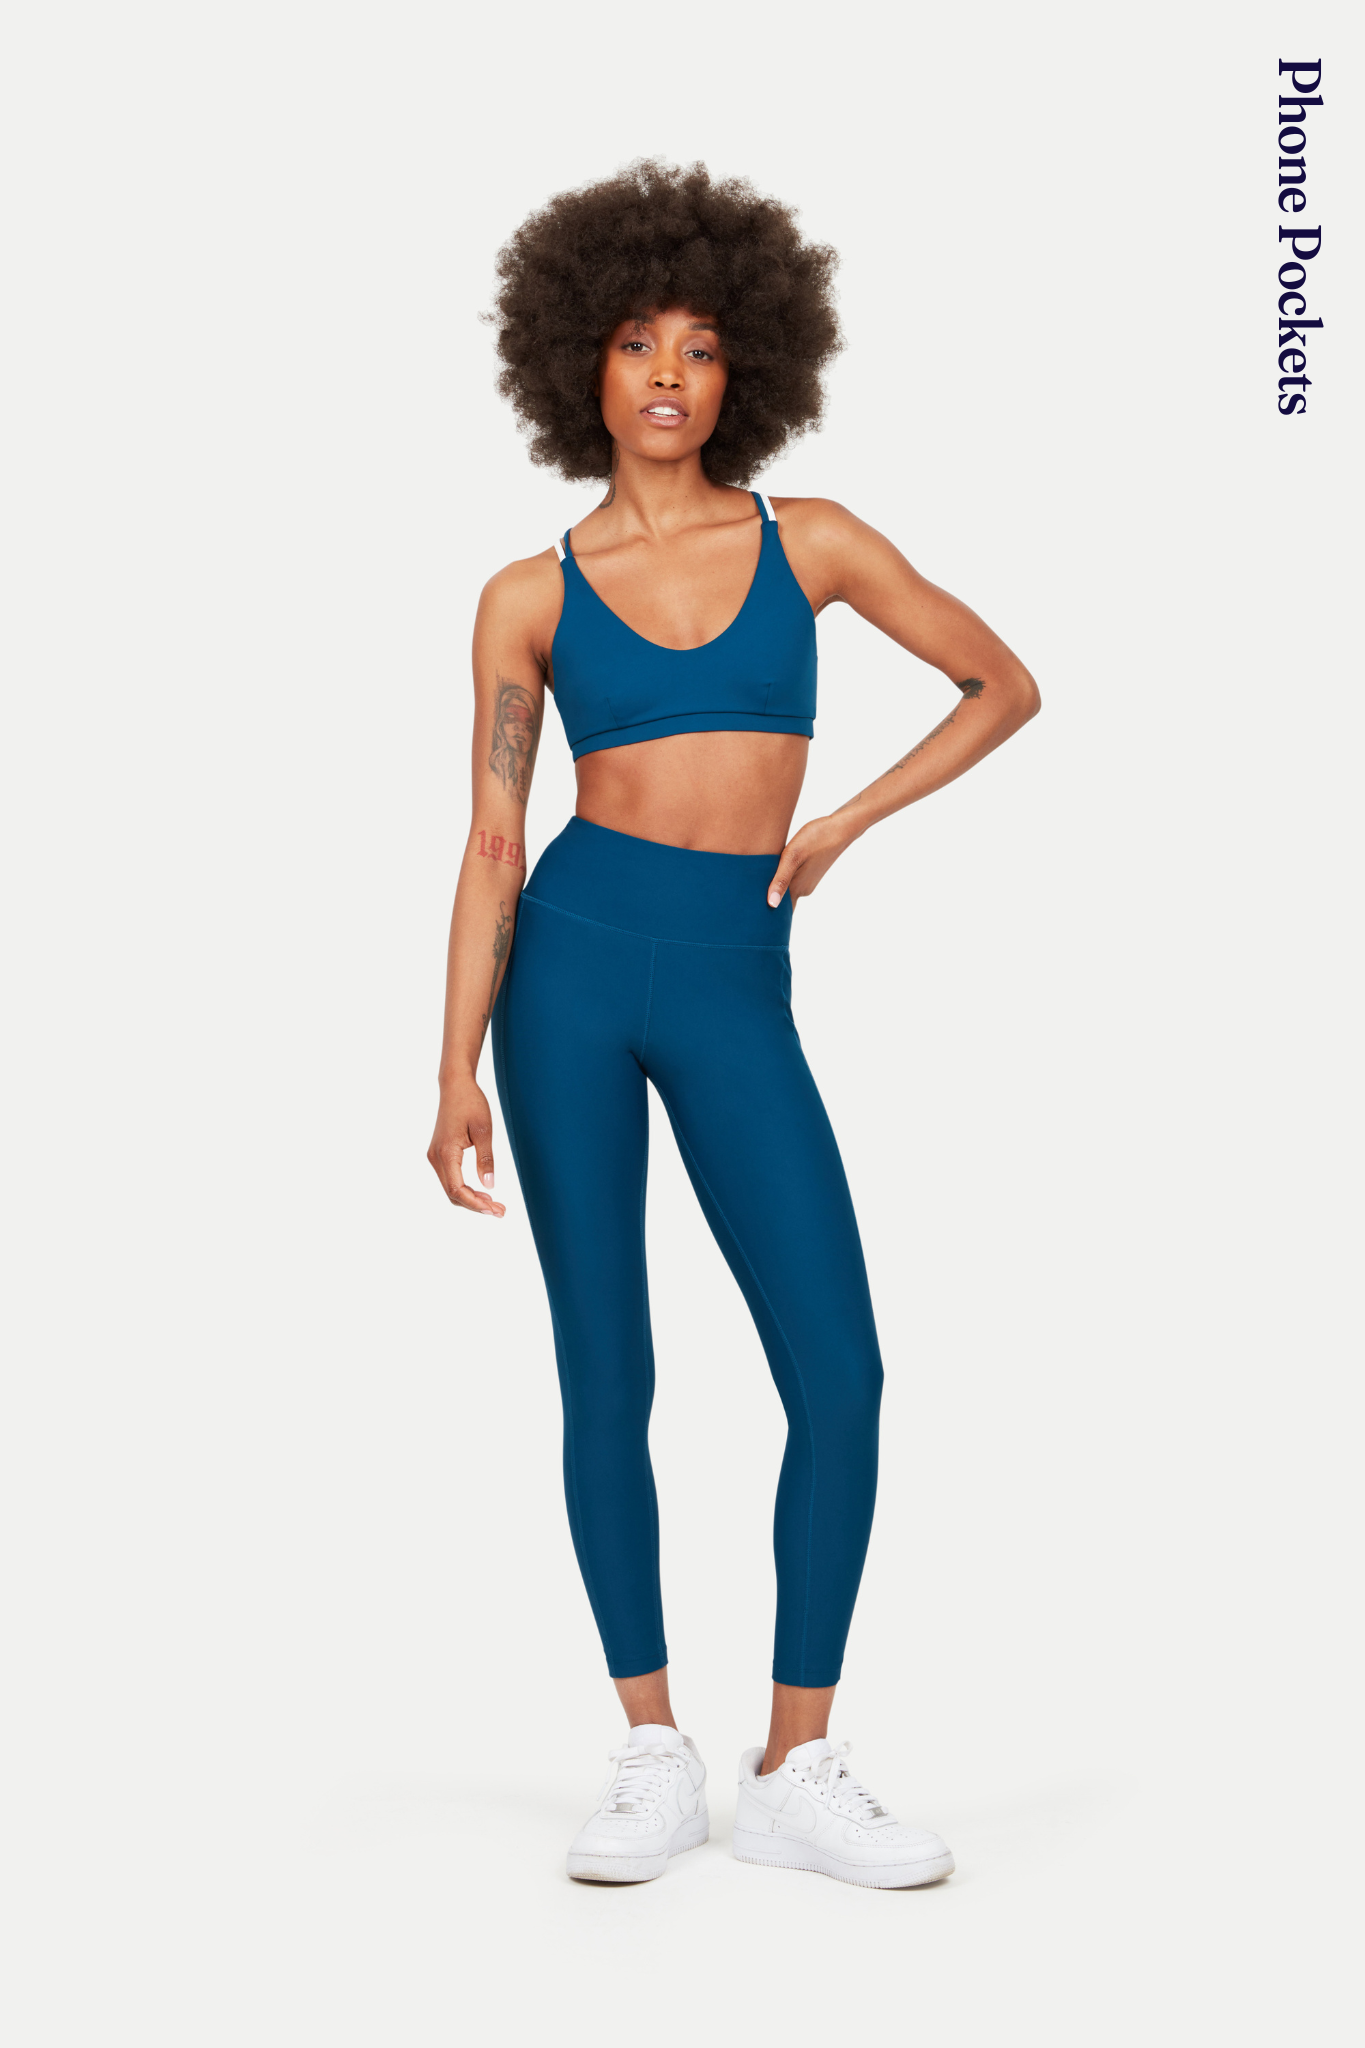 Blue Gym Leggings with Pockets, Squat Proof